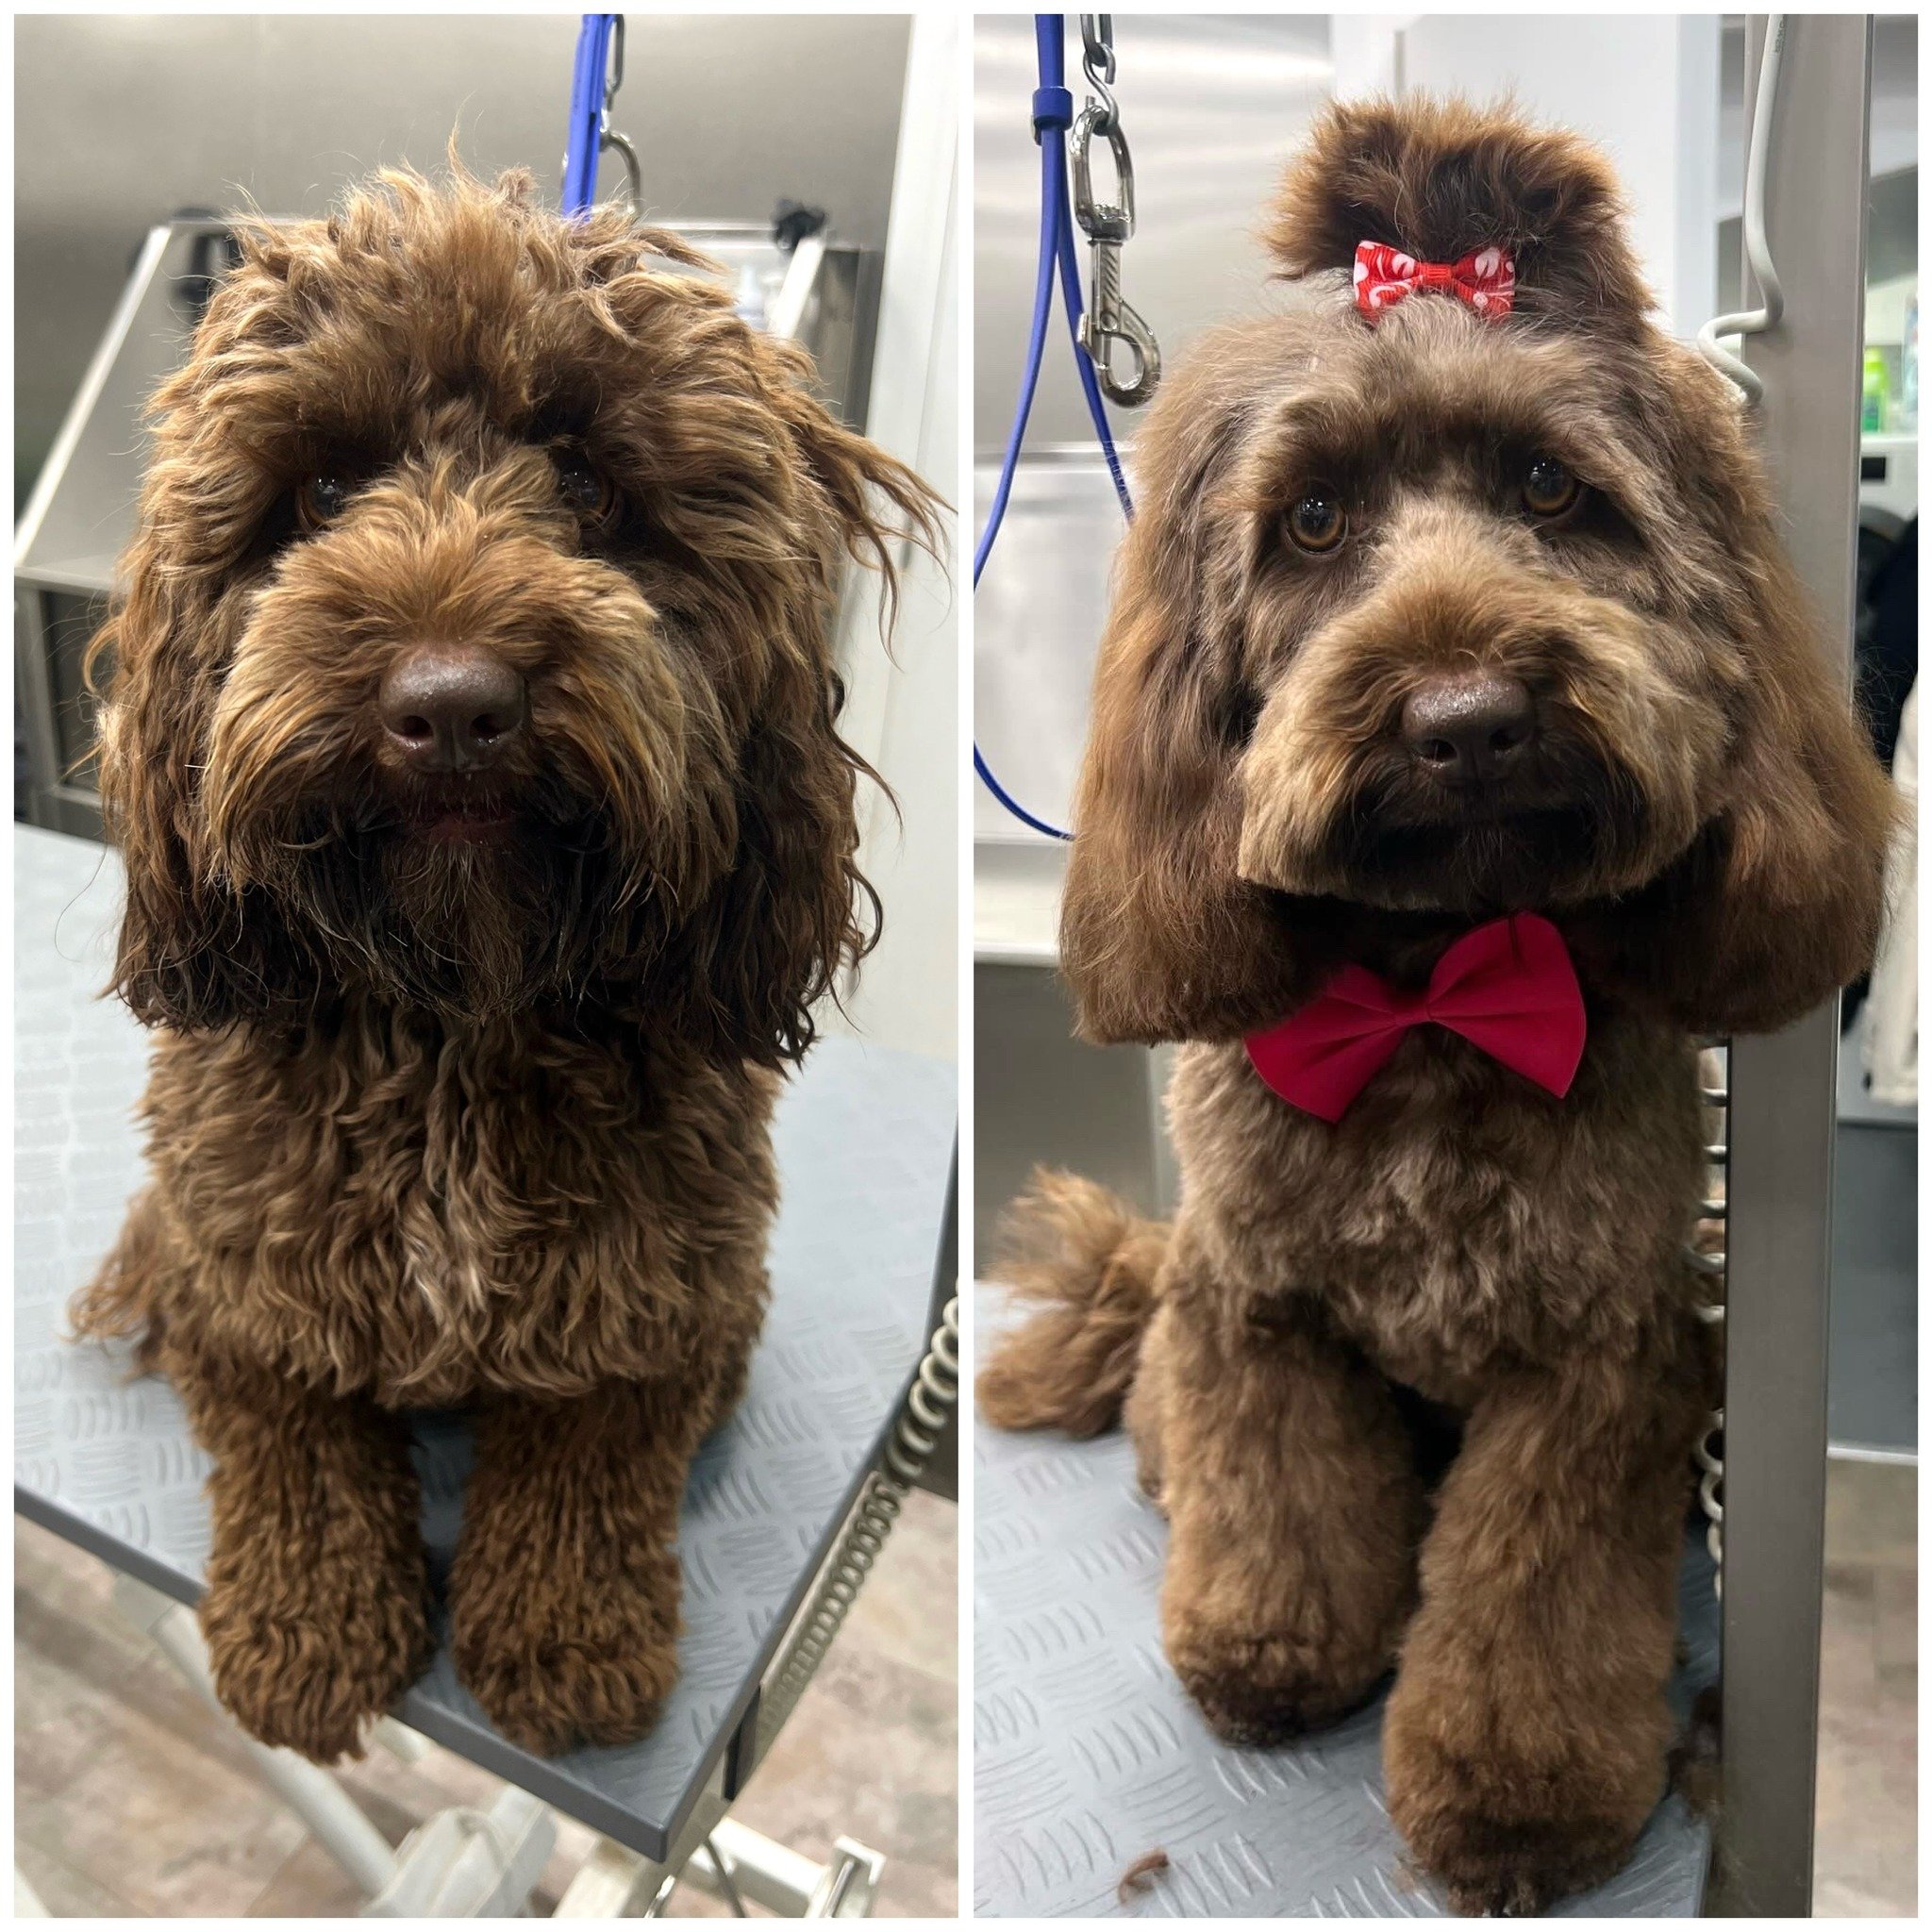 🐶🛁✂️Magical transformation! Our furry friend looks so cute and fluffy! 🥰🫧🐾
.
💈By Stella 
📍Chiswick 
.
.
.
#petpavilion #doggroomer #doggrooming #beforeandaftergrooming #lovelydog #loversdog #furryfriend